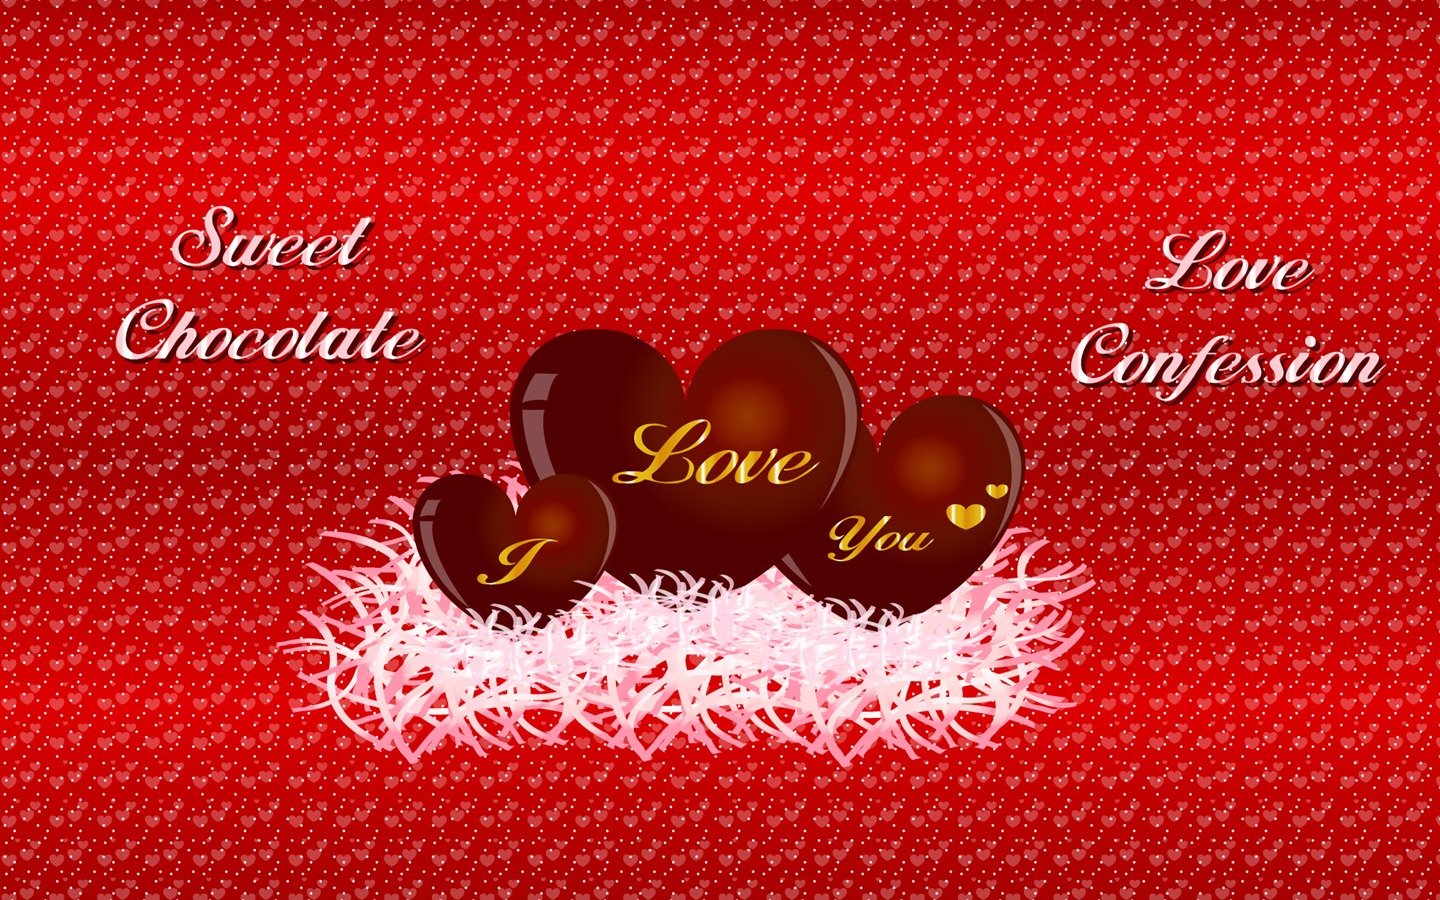 Valentine's Day Theme Wallpapers (1) #15 - 1440x900